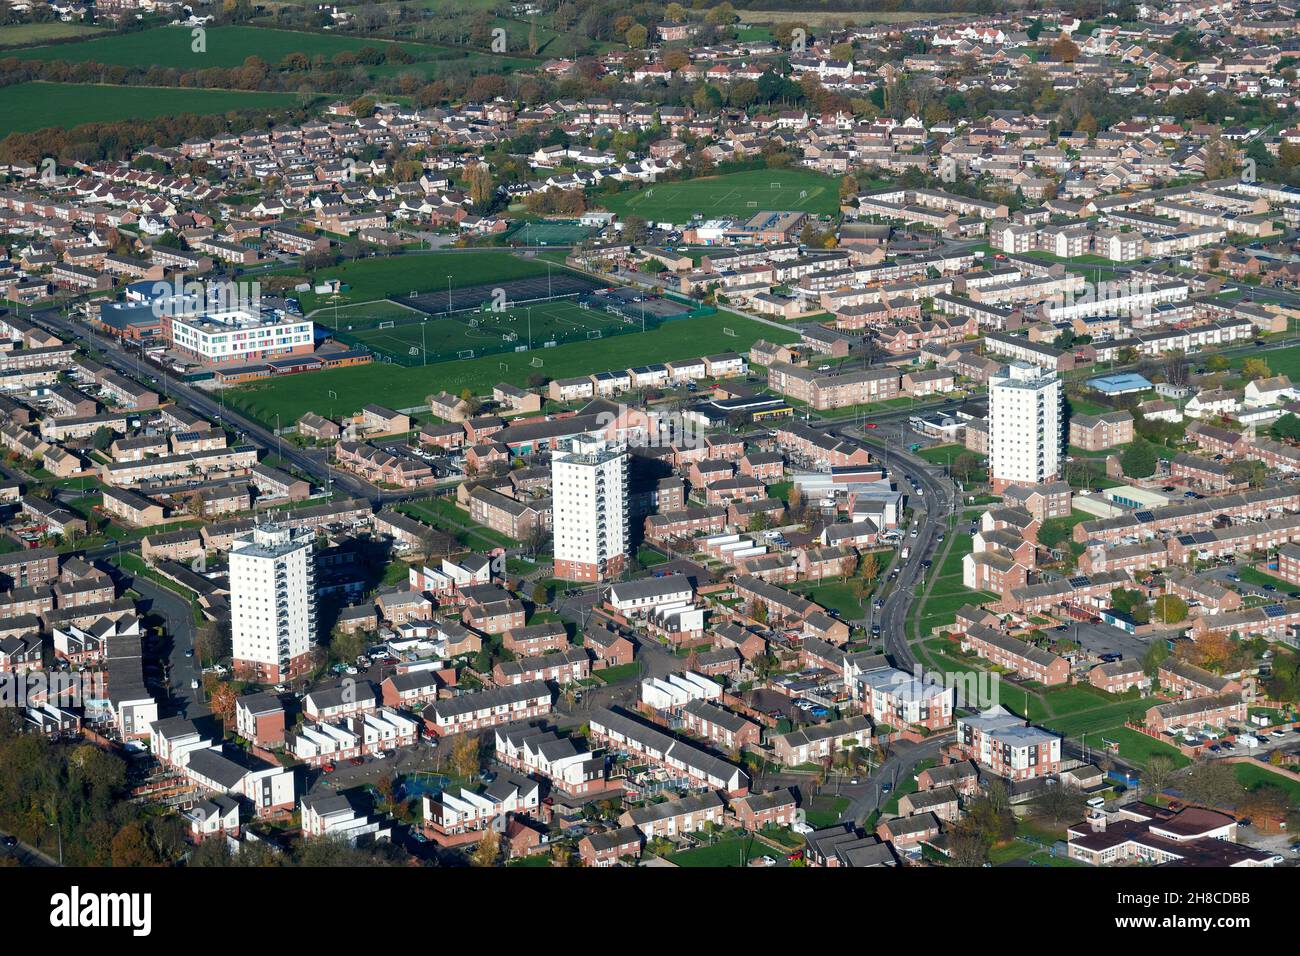 Local authority housing and blocks of flats, from the air, Chester, north West England, UK Stock Photo